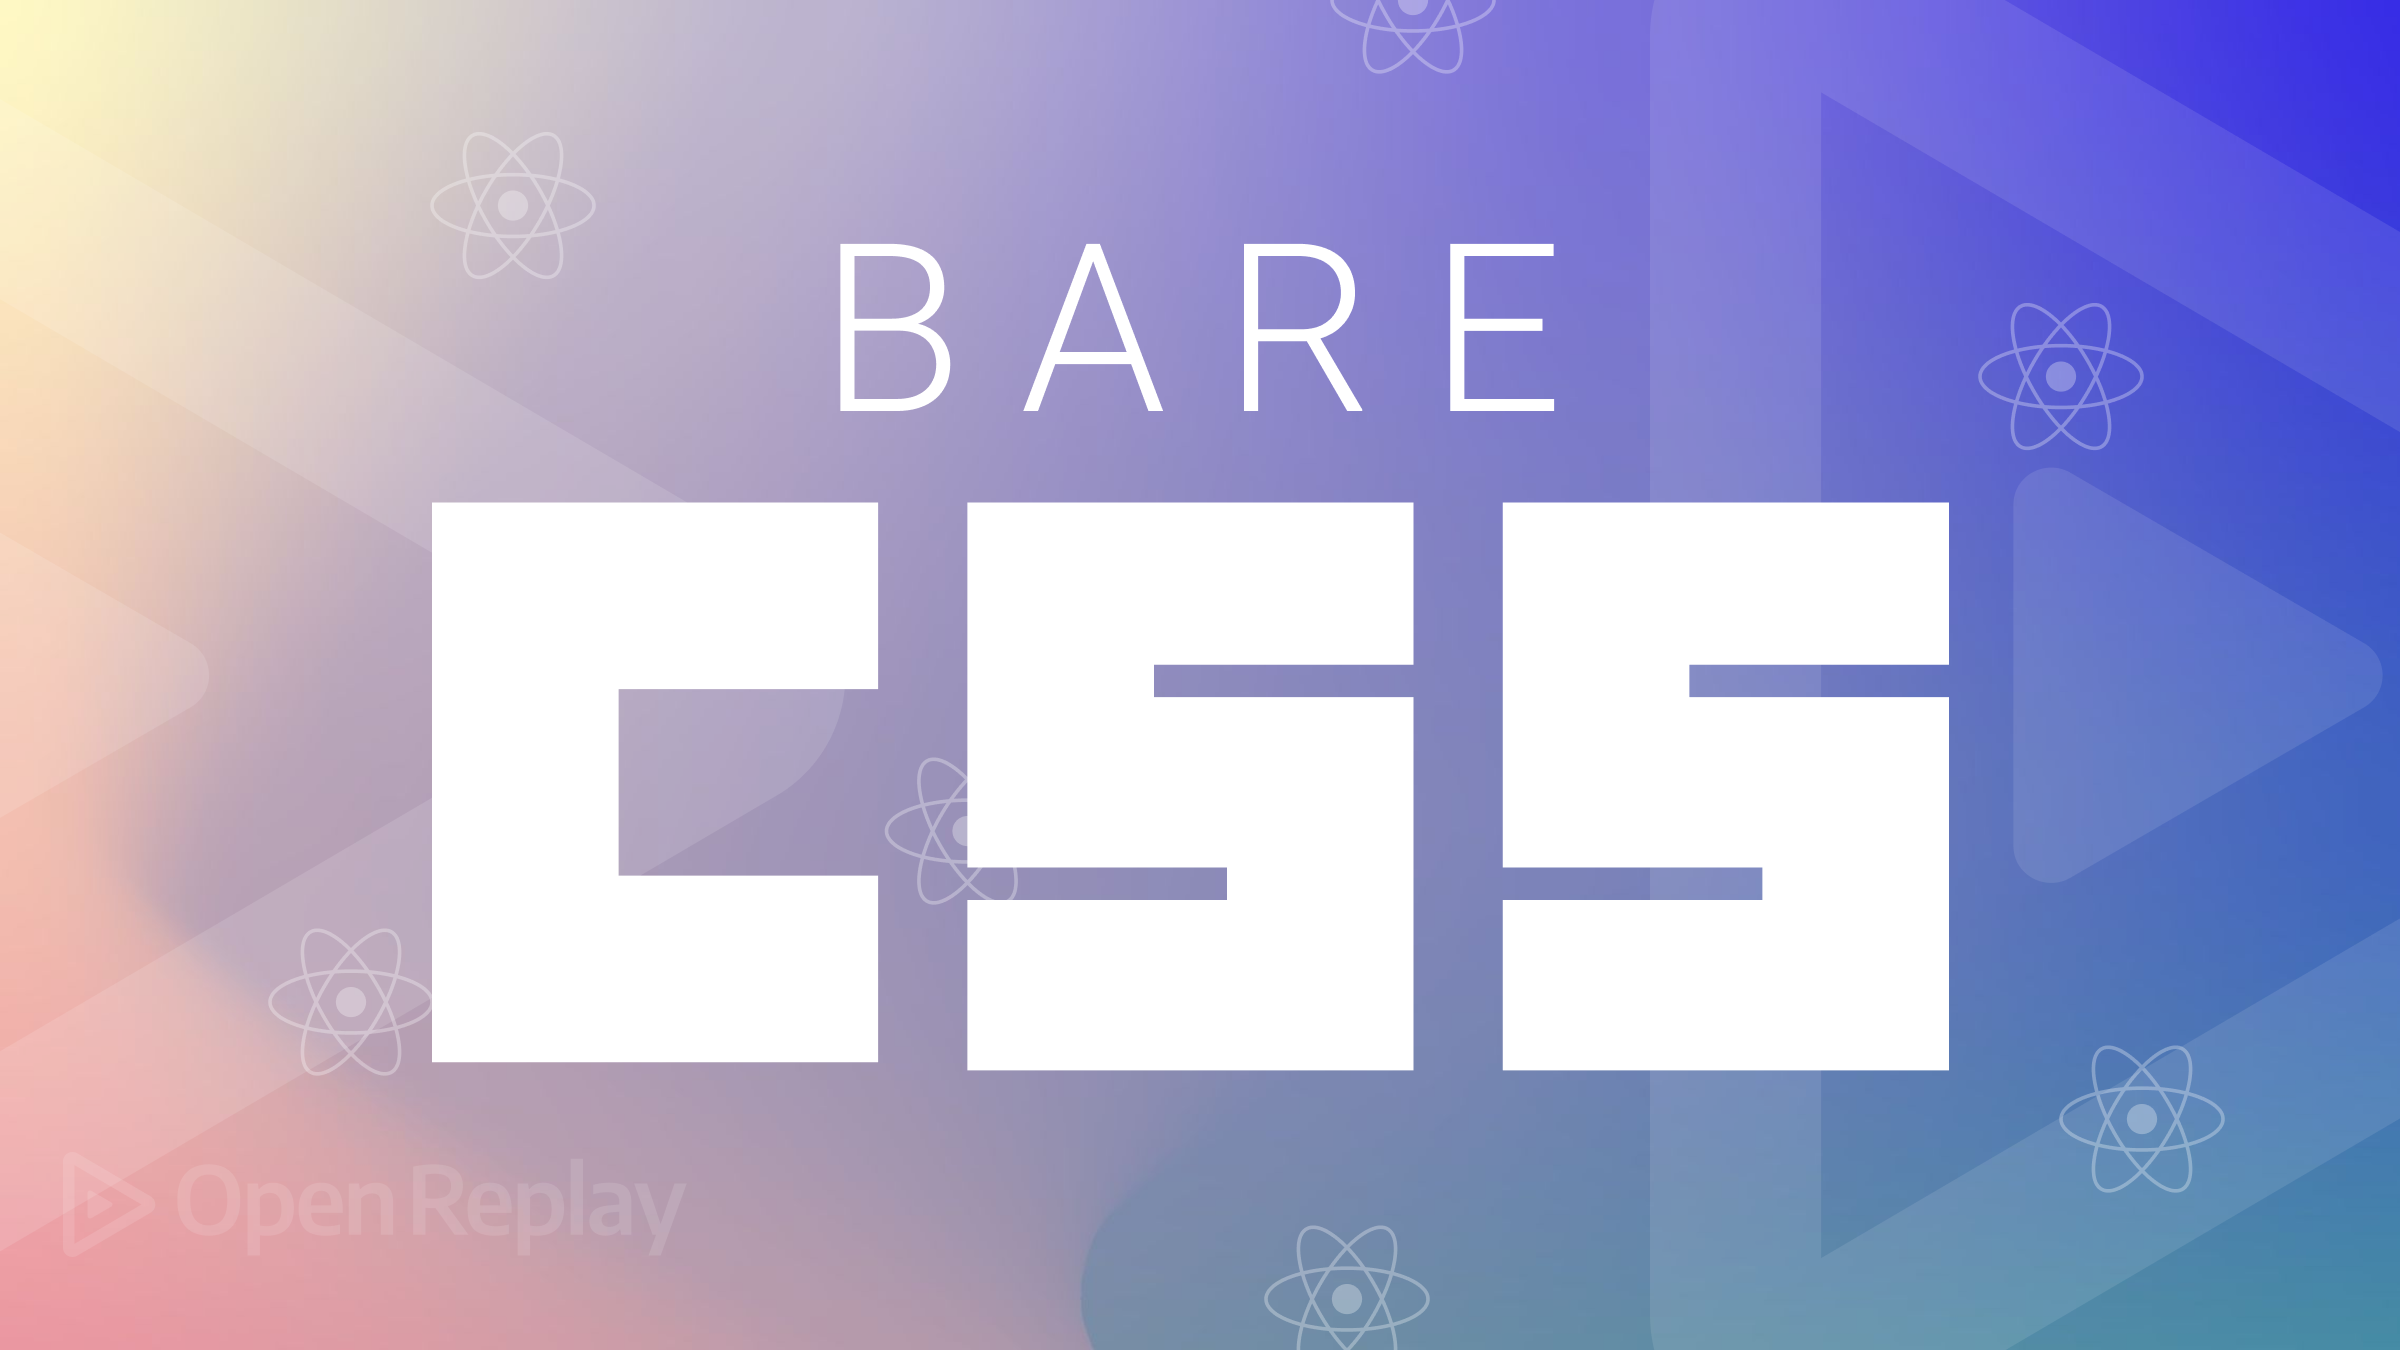 A beginner's guide to BareCSS